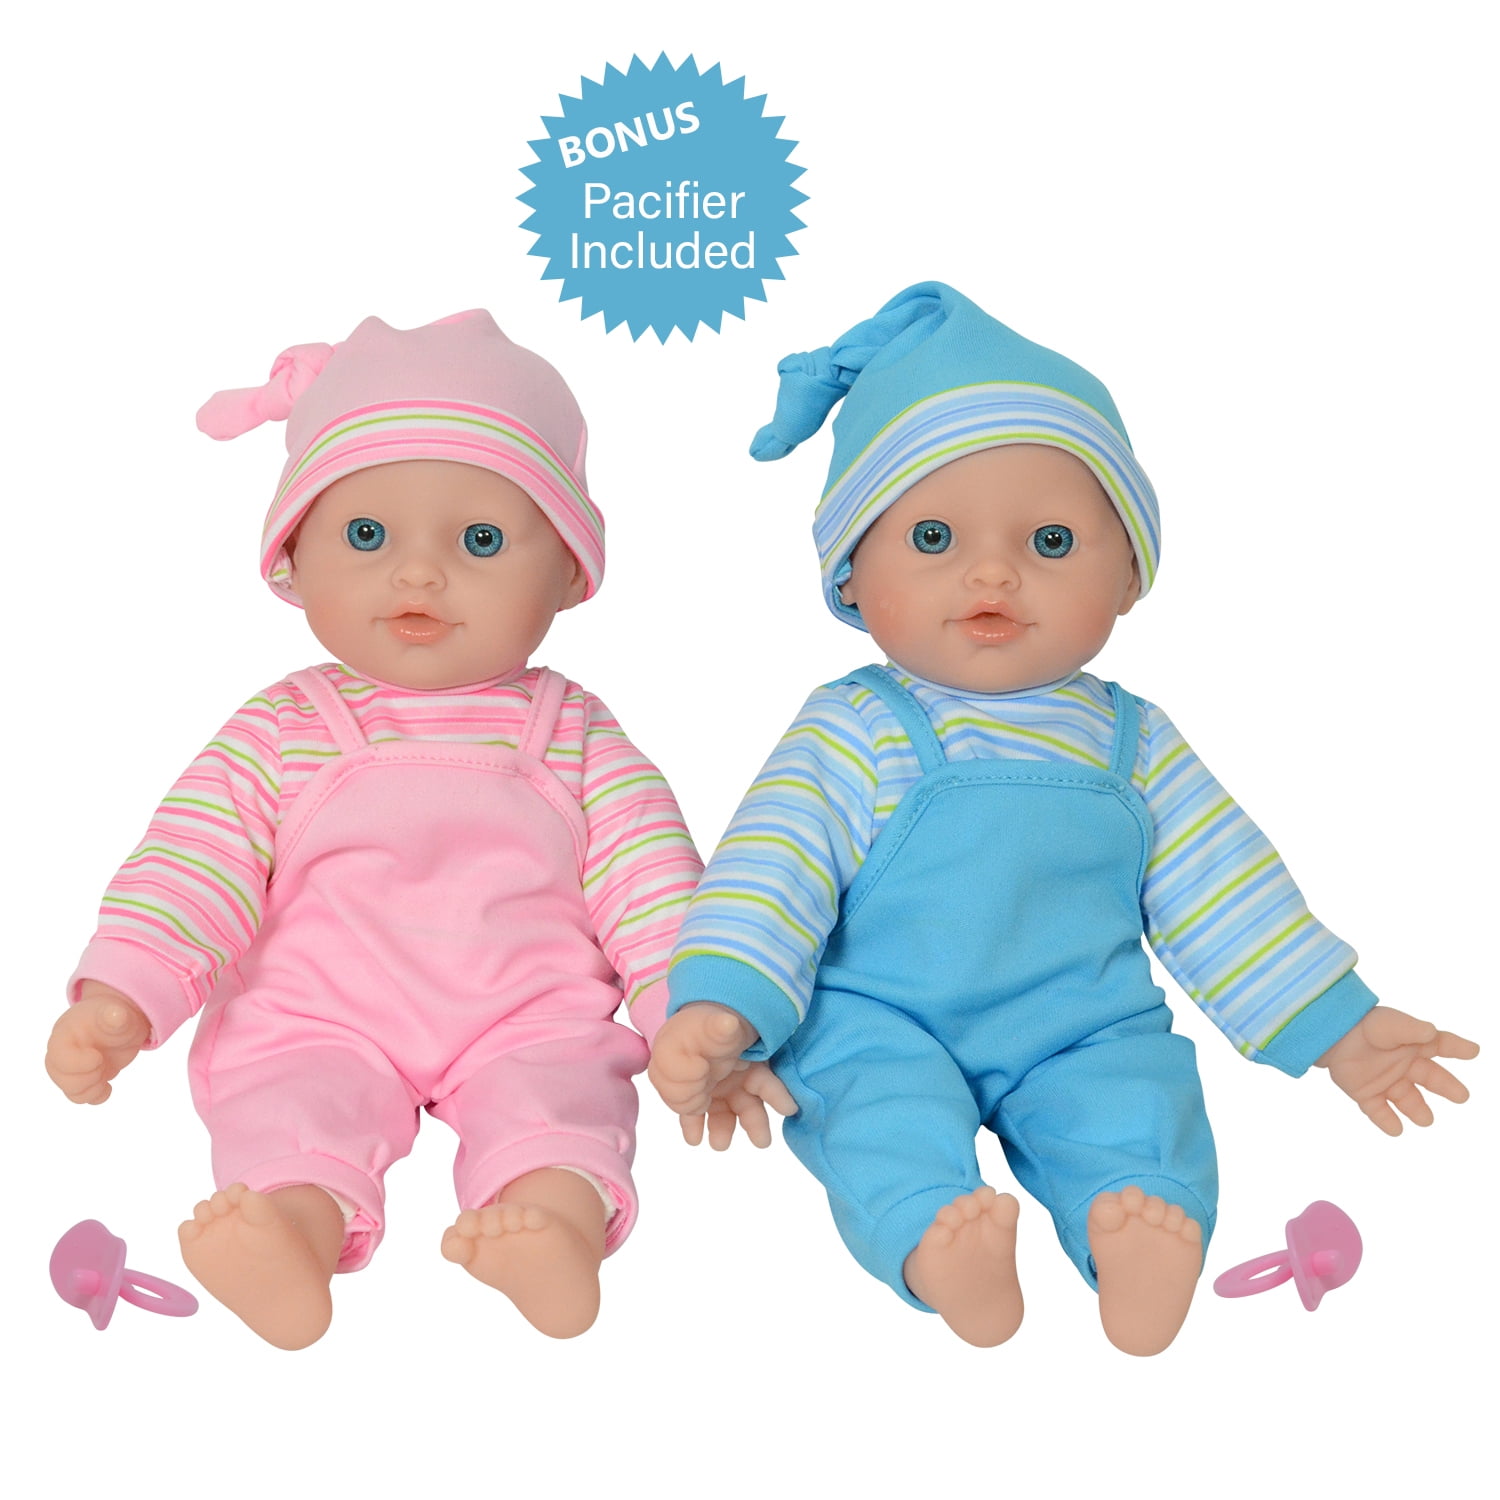 Soft Bodied Baby So Soft Doll Pink Or Blue 